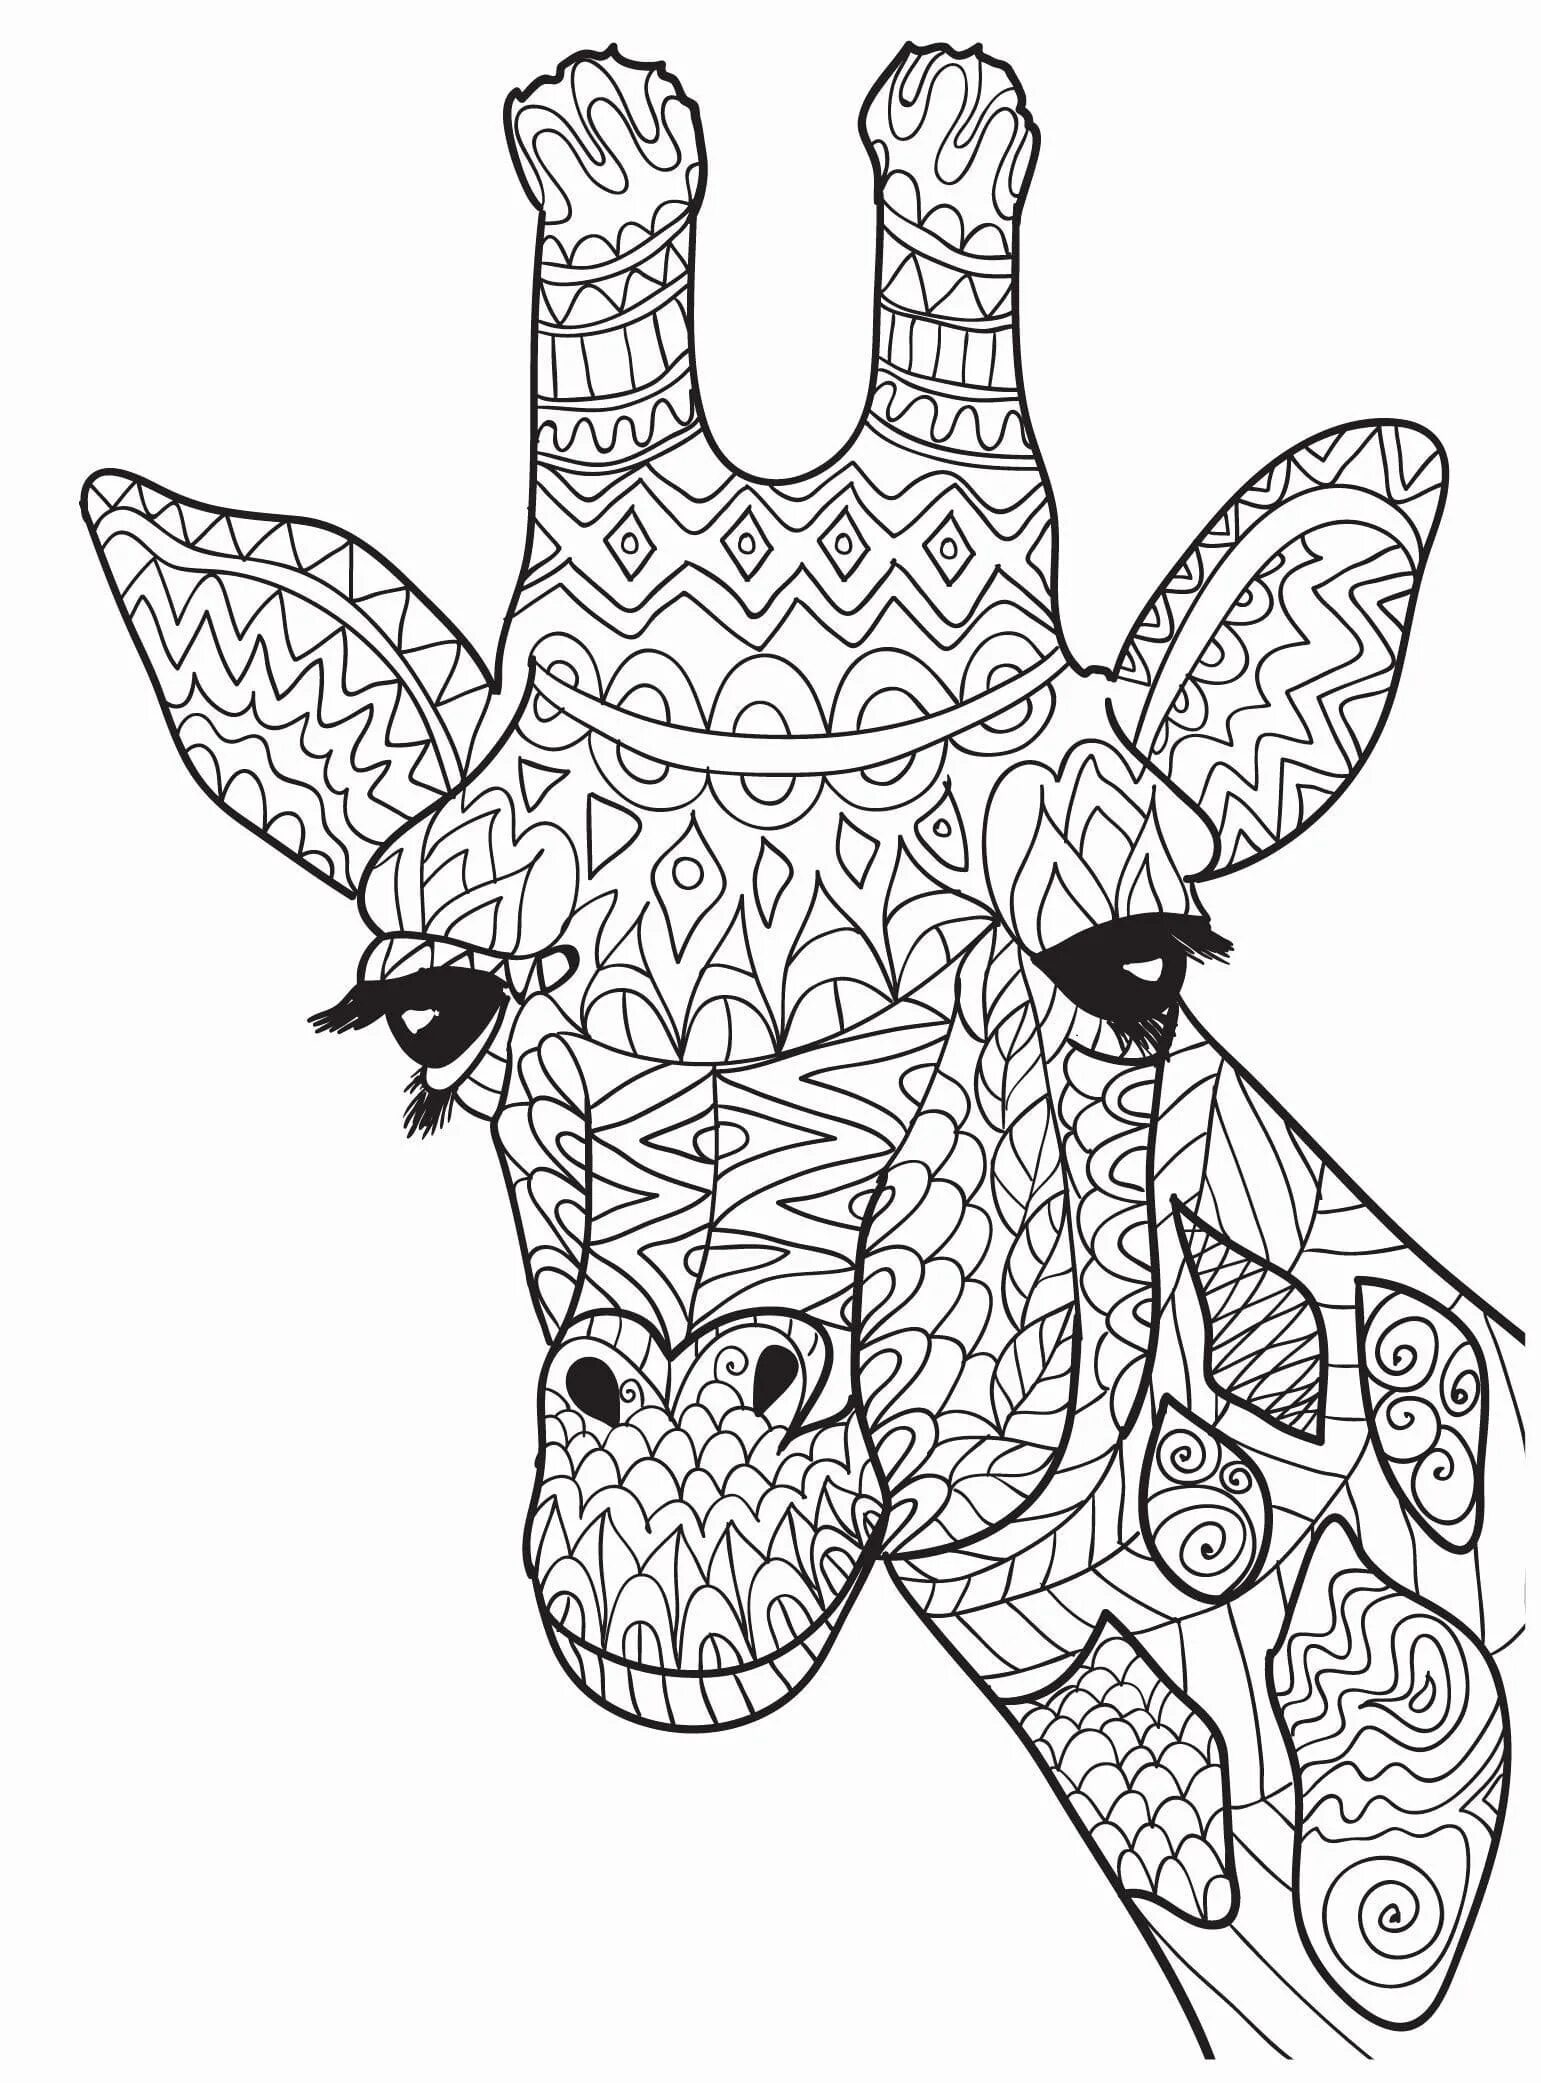 Radiant animal coloring pages for adults